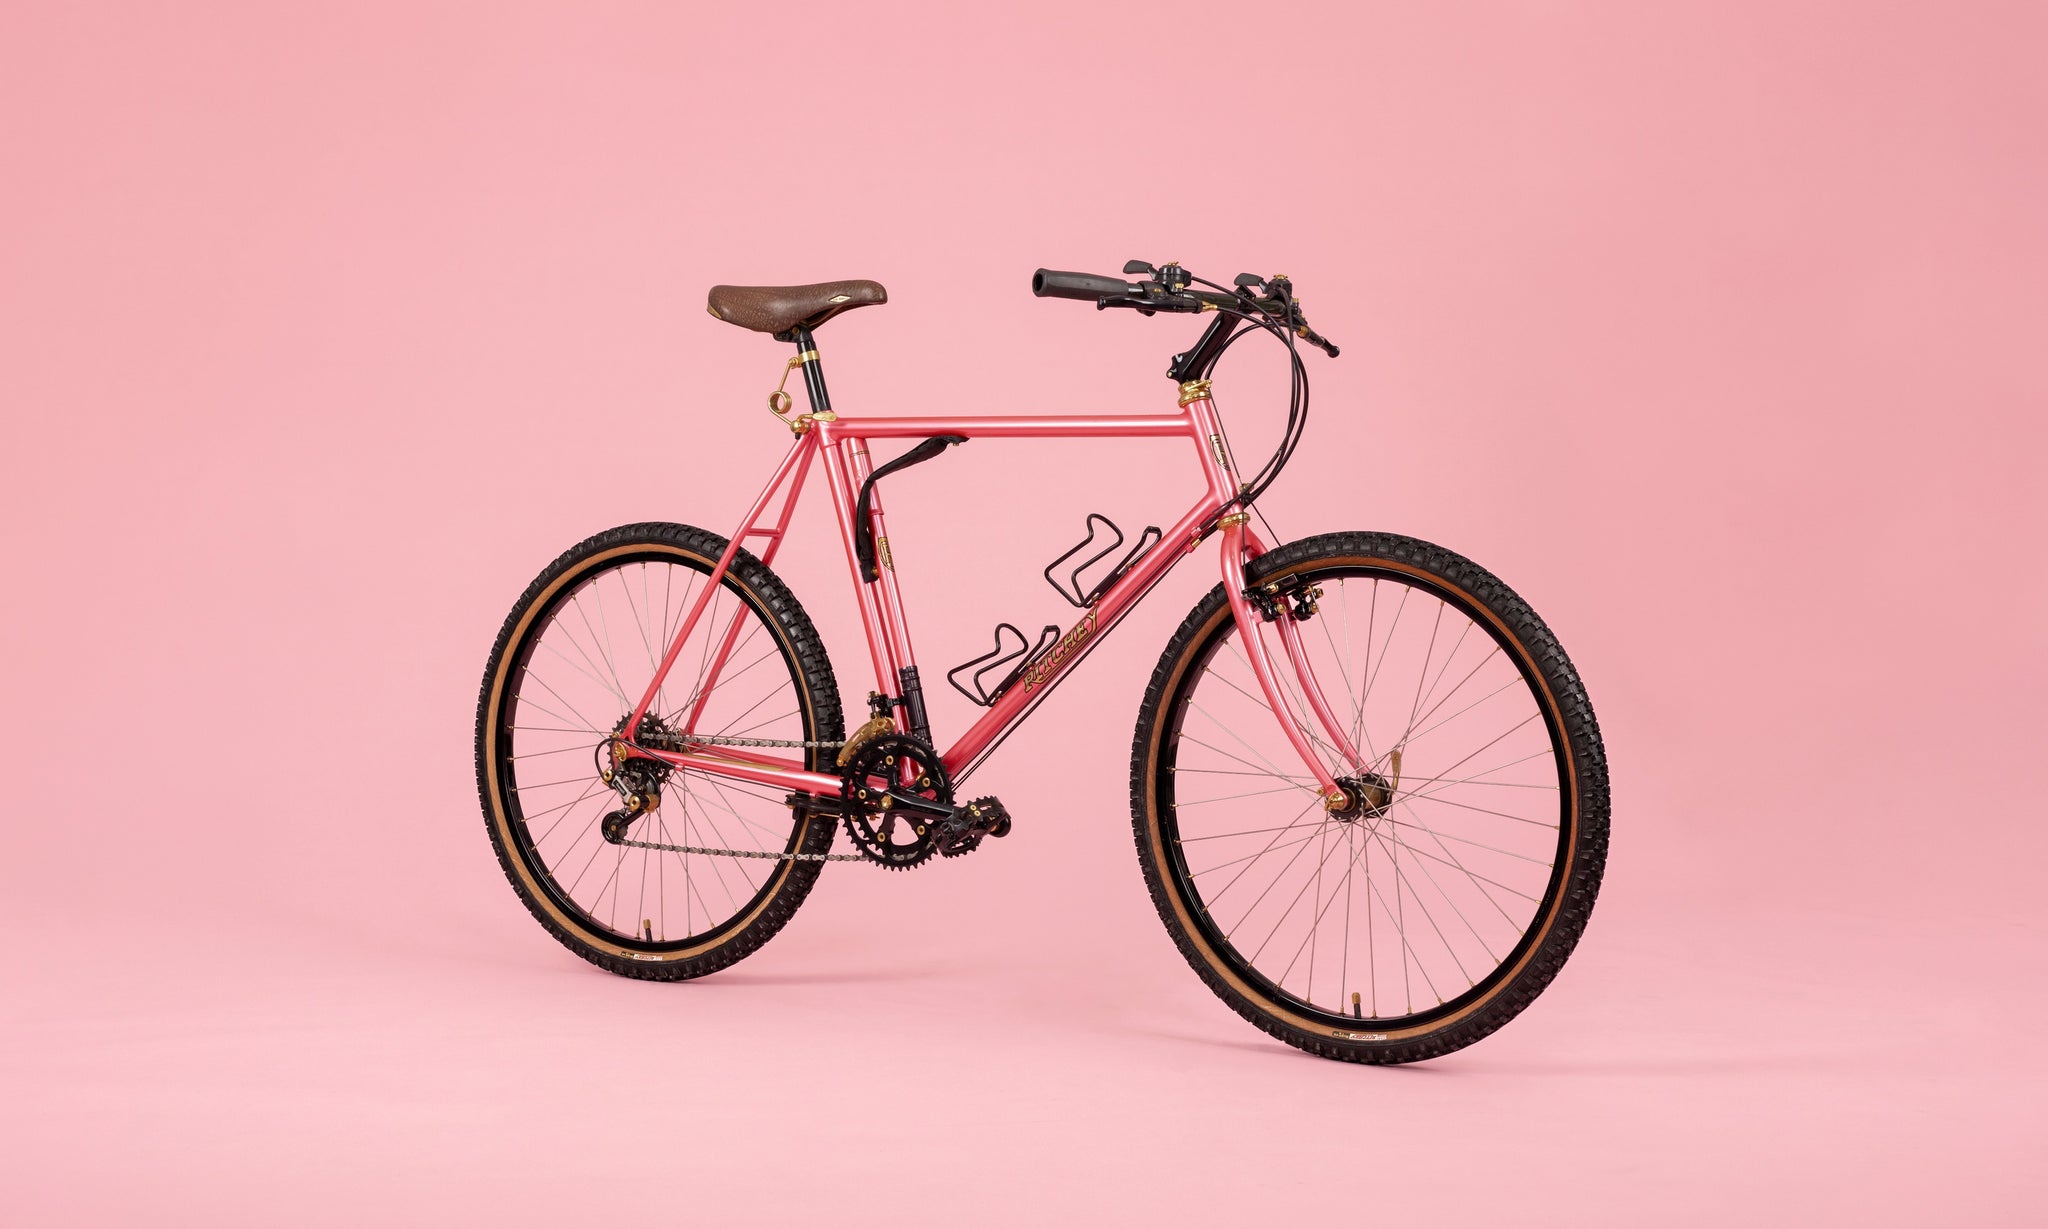 Wild Irish Rose: A Vintage Ritchey MTB with Gold-Plated Parts